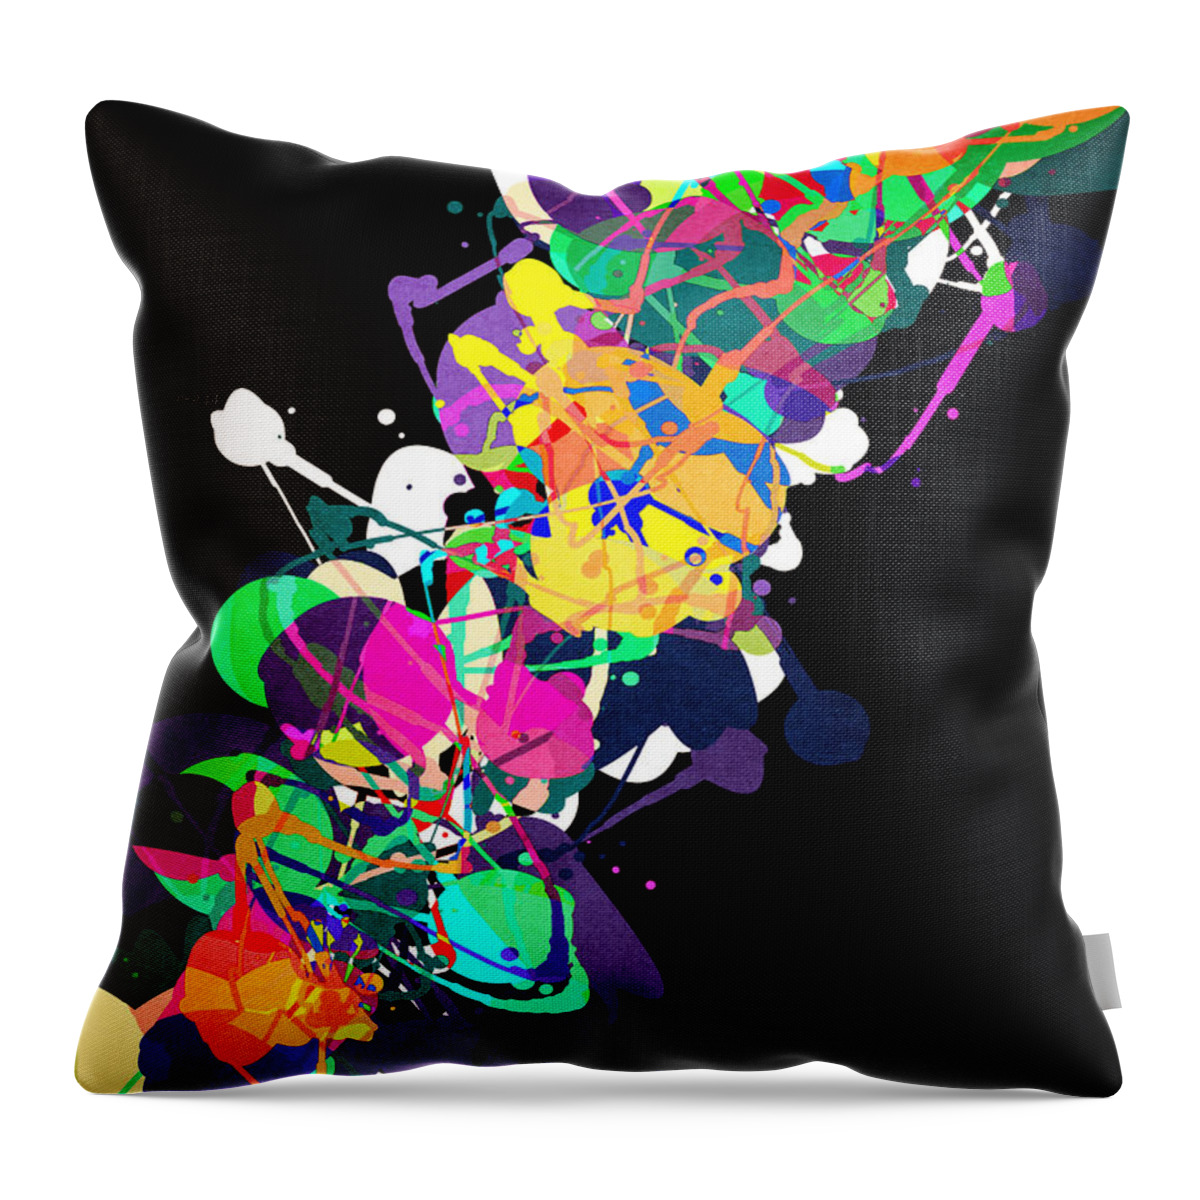 Mixed Media Throw Pillow featuring the digital art Mixed Media Colors 1 by Phil Perkins